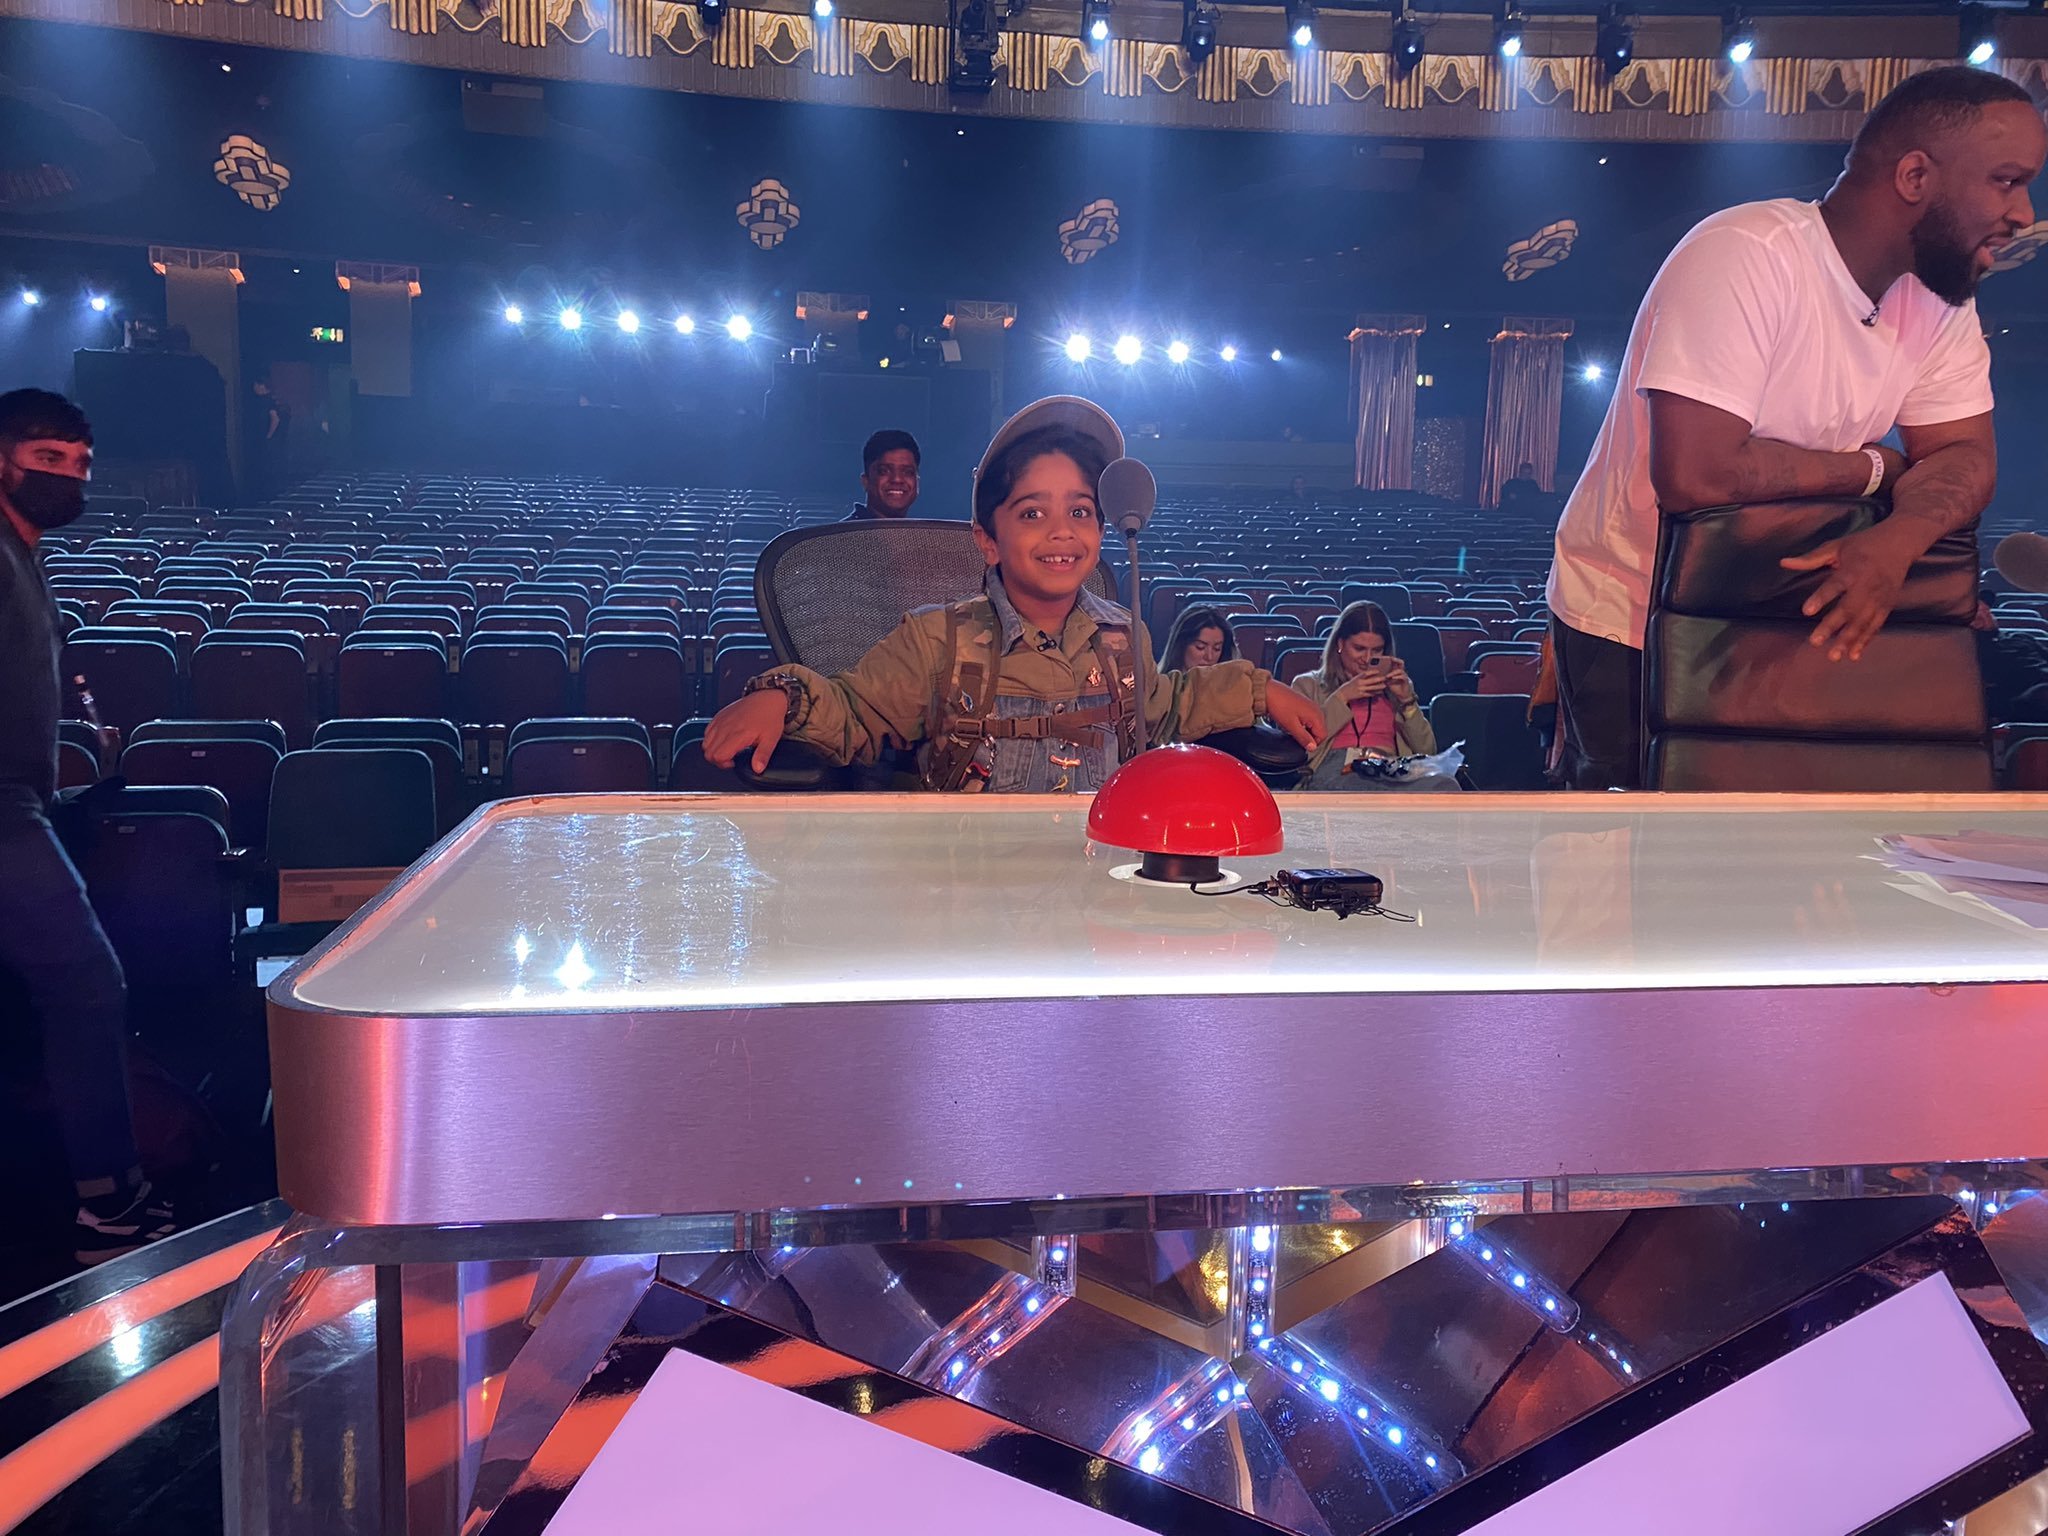 He tried out the seats on the judges panel